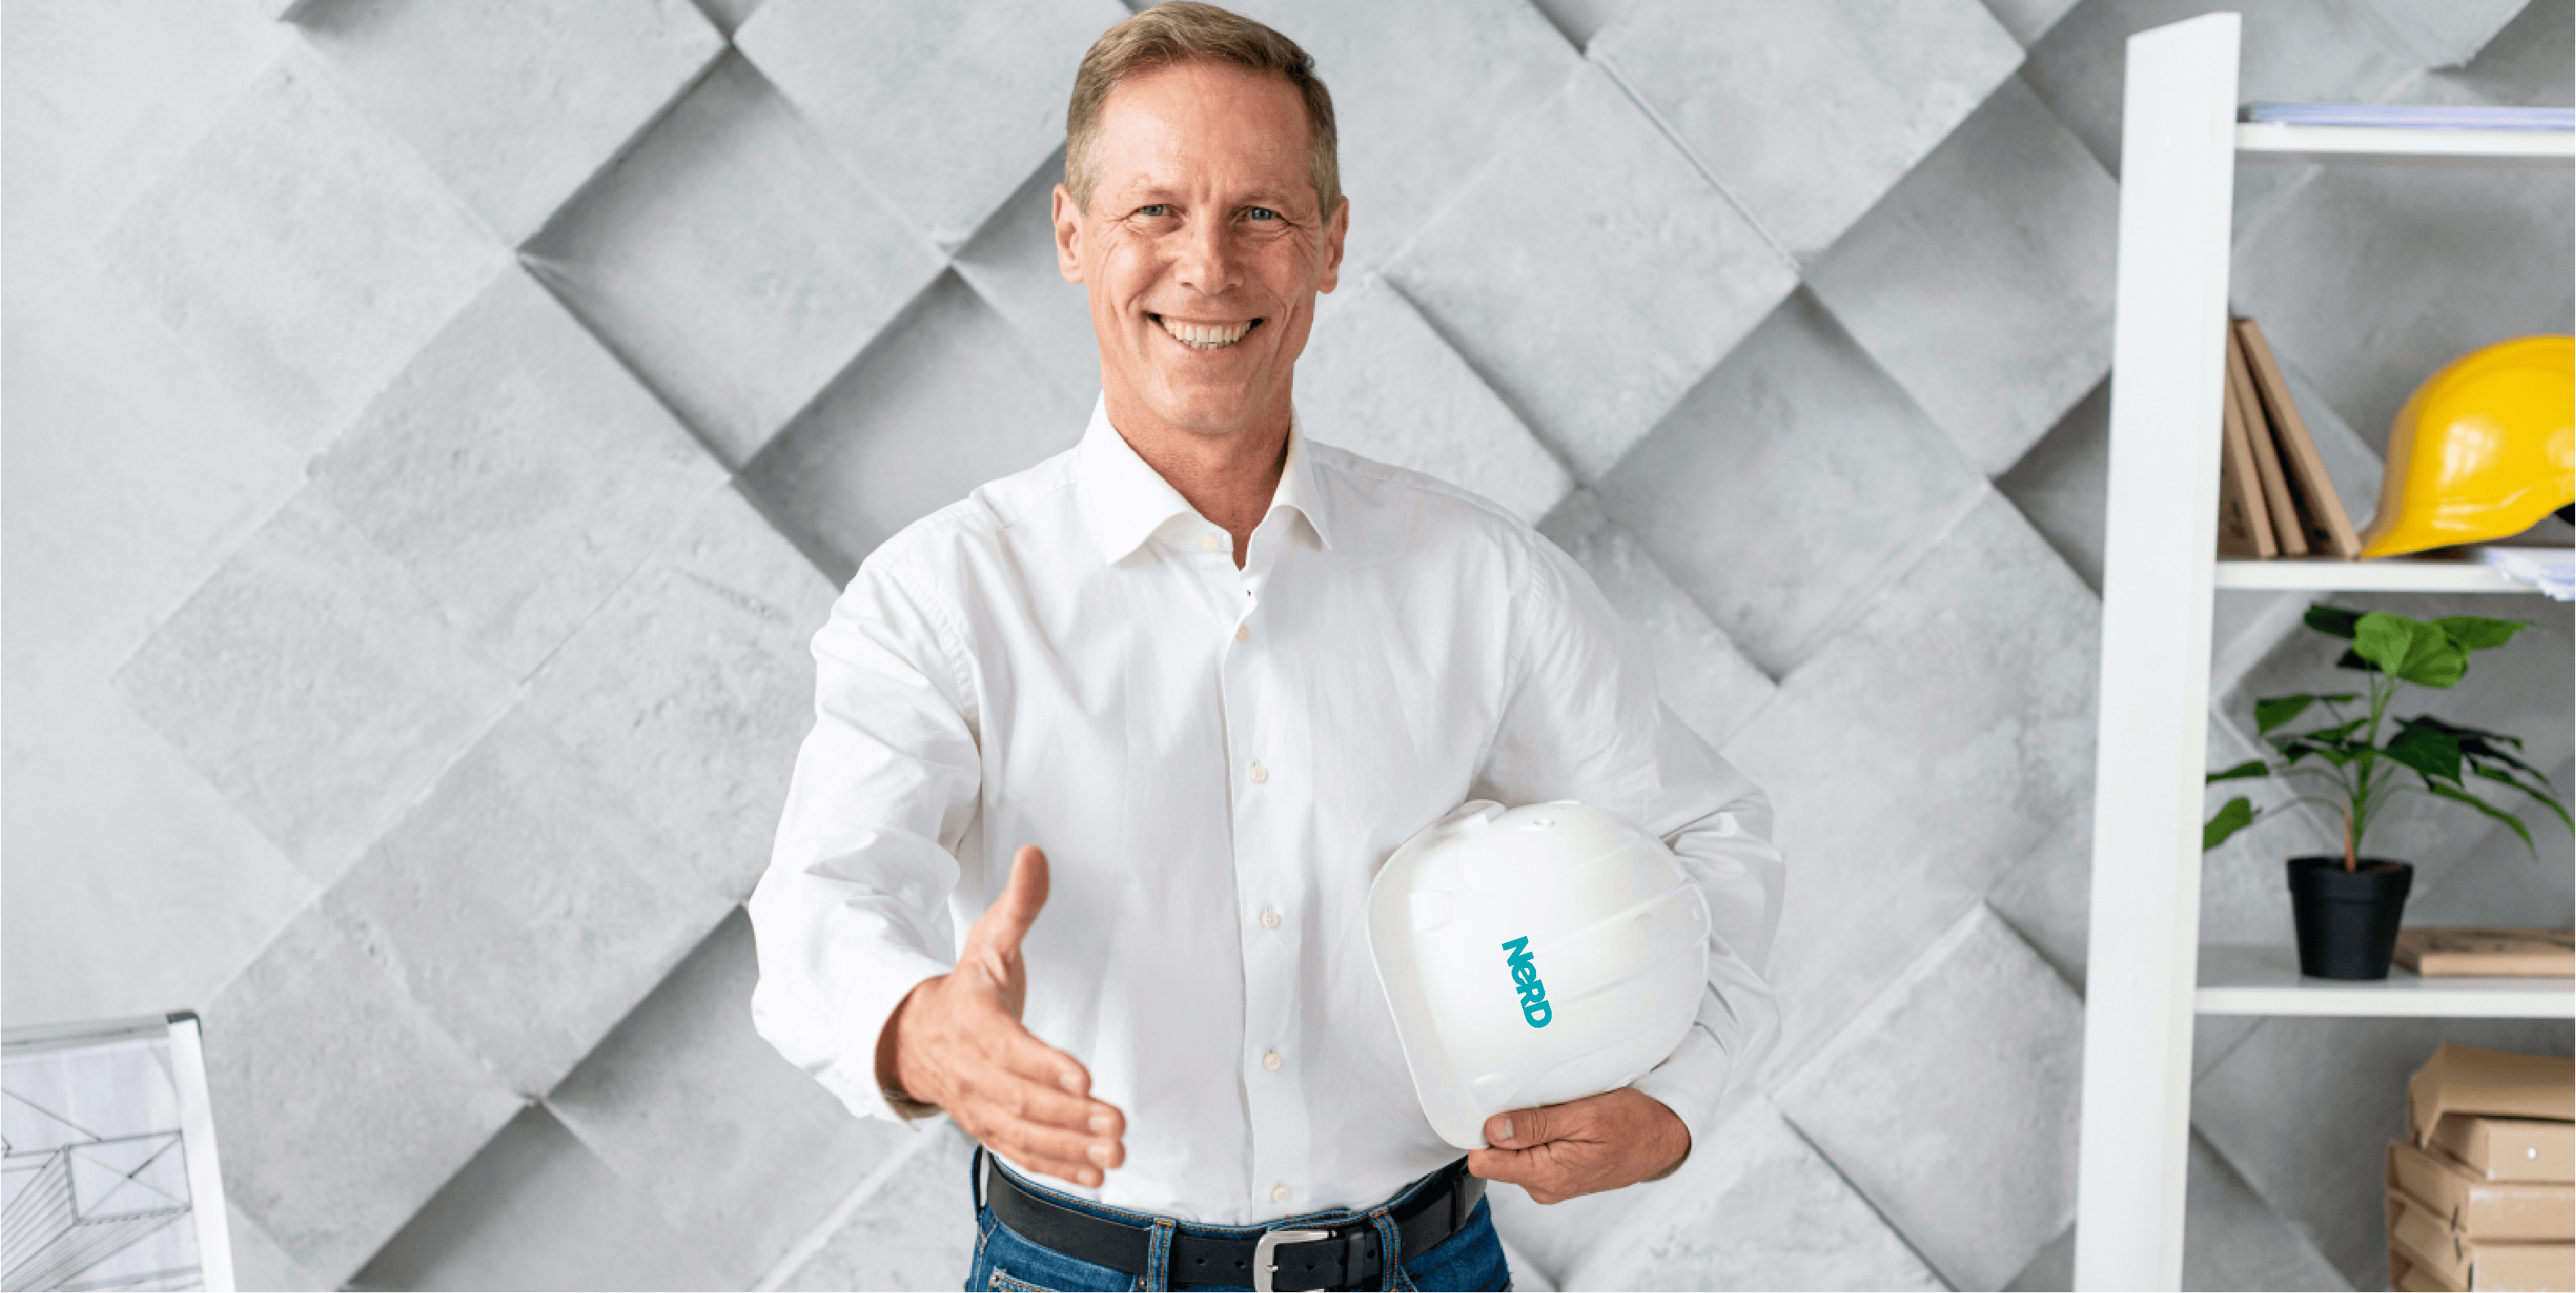 A sharply dressed man inside a home, holding out his right arm to shake hands, and carrying a white hard hat under his left arm.